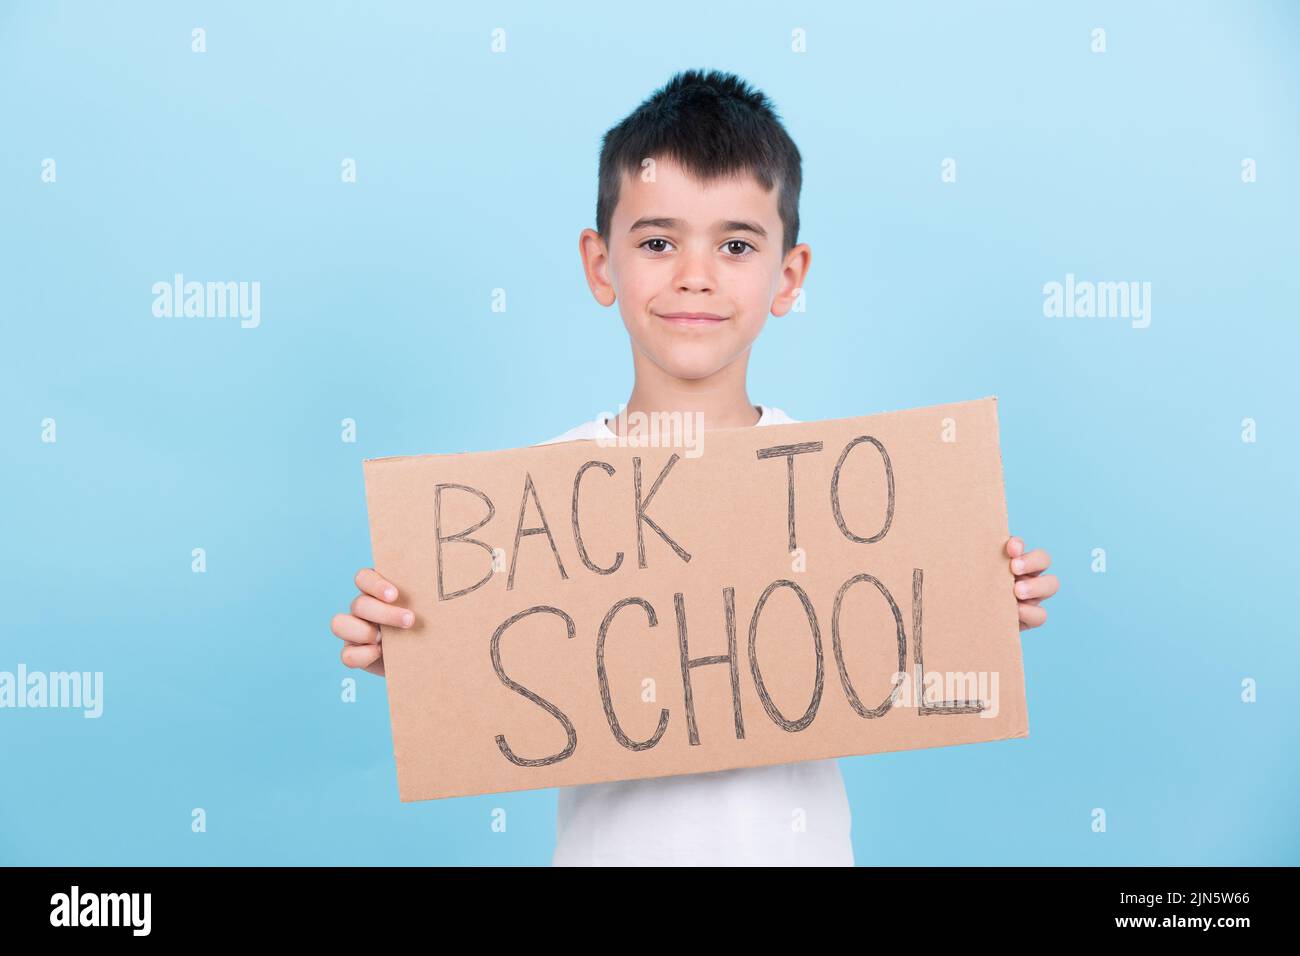 a boy holds a back-to-school poster Stock Photo